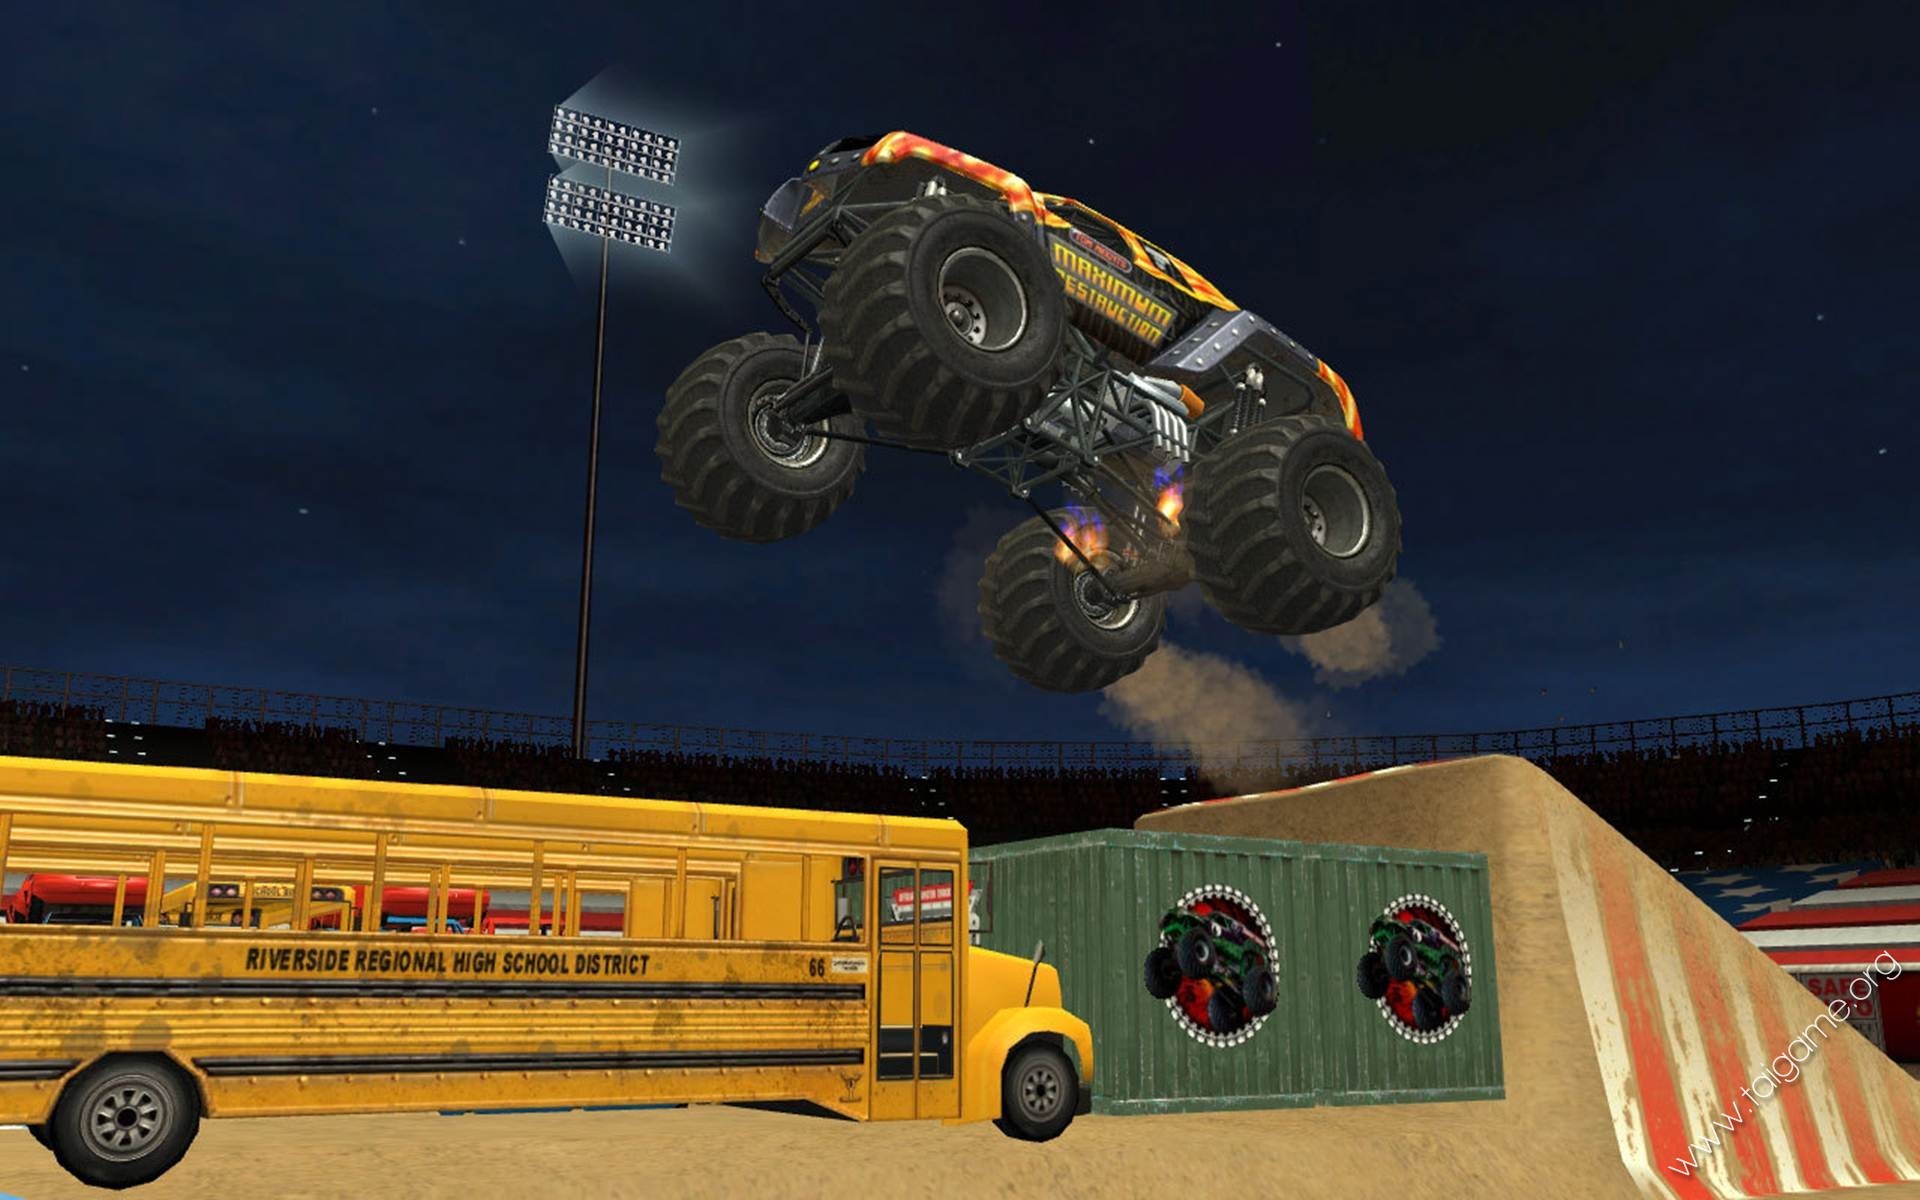 Download Tonka Monster Truck Pc Game Free